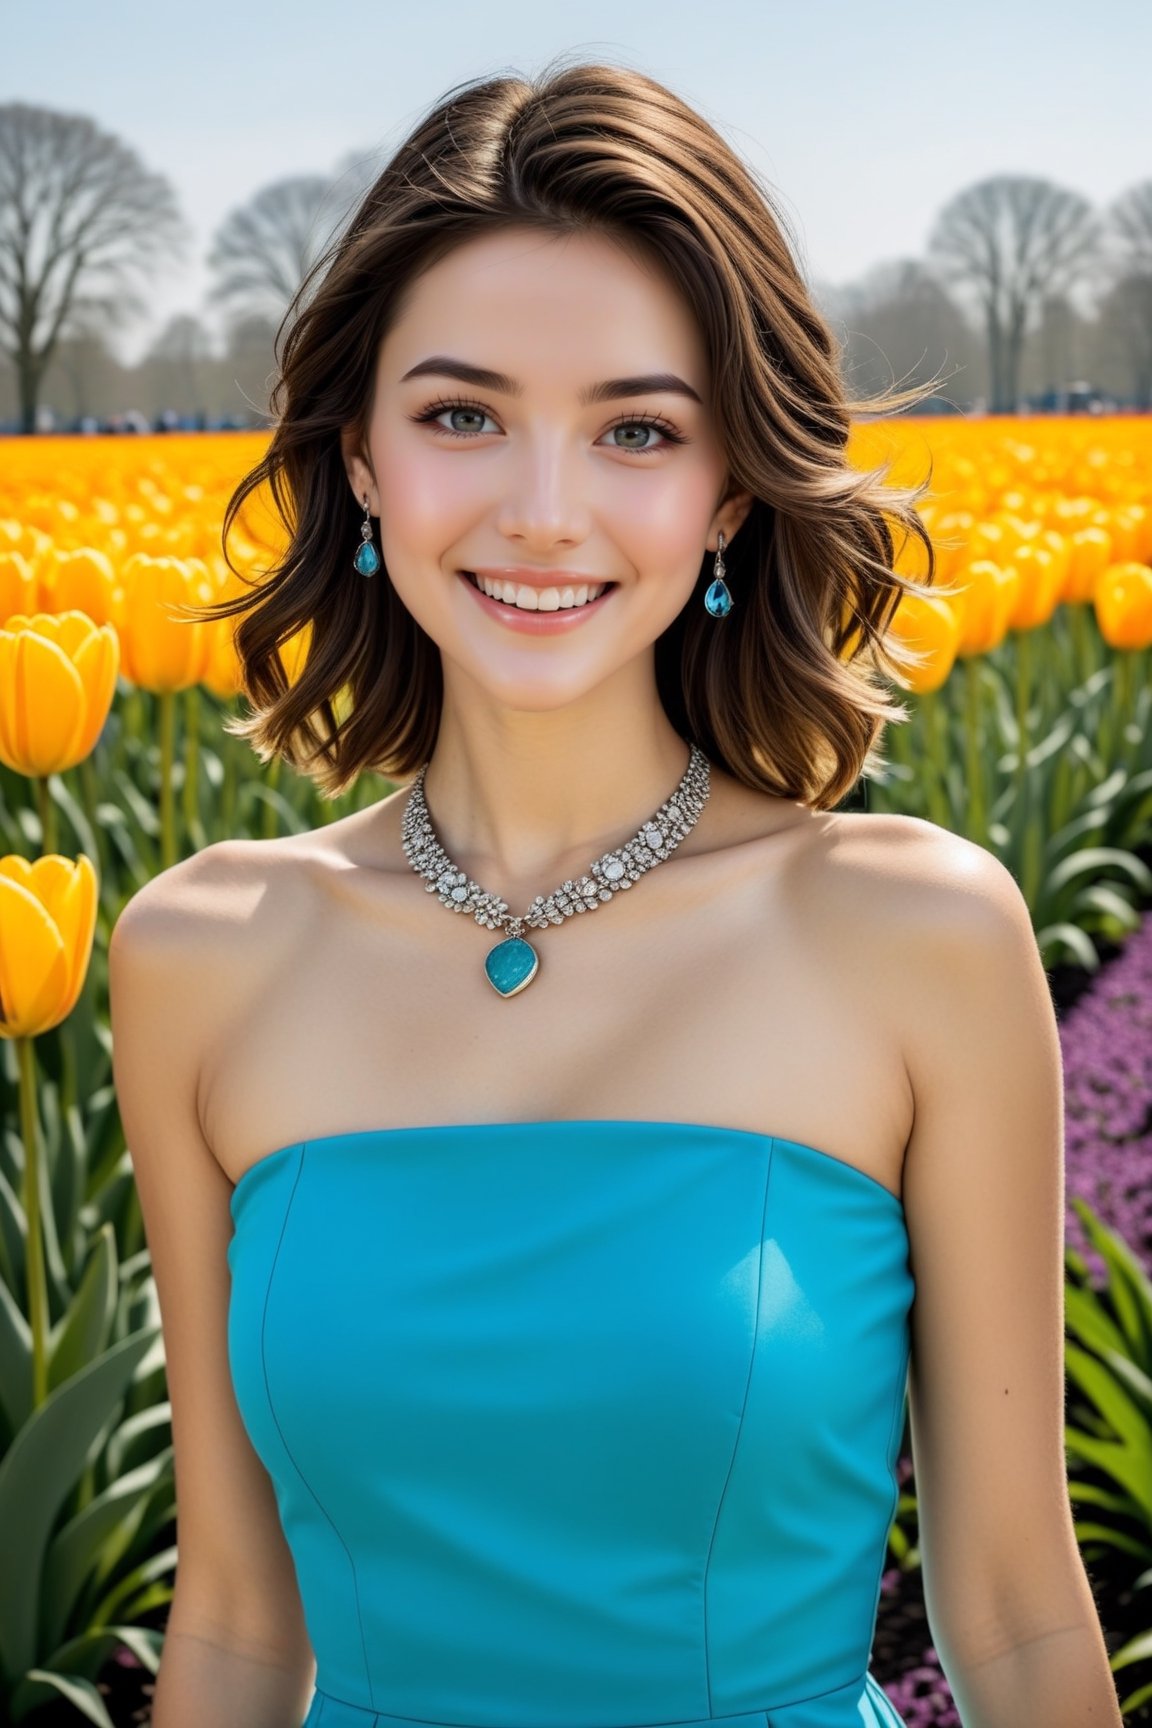 (Hyper-Realistic) photo of a girl,20yo,clear facial features,shiny skin,earrings,necklace,smile, mesmerizing,disheveled blowing short hair,perfect female form,perfect body proportion,perfect anatomy,elegant form-fitting short dress,( Turquoise,Baby Blue,Mustard Yellow,Gray color),(fullbody:1.3),(shoes:1.3)
BREAK
(backdrop of one of the largest and most spectacular flower gardens in the world, also known as the “Garden of Europe”. Located in the Dutch town of Lisse, the park spans over 79 acres and features tulips, daffodils, hyacinths, and other spring flowers. Keukenhof Gardens, where more than 7 million bulbs, including flowers, are planted each year)
BREAK
rule of thirds,perfect composition,depth of perspective,studio photo,trending on artstation,(Masterpiece,Best quality,sharp focus,high contrast,HDR,hyper-detailed,intricate details,ultra-realistic:1.3),(cinematic lighting),by Karol Bak,Gustav Klimt and Hayao Miyazaki,photo_b00ster,real_booster, ani_booster